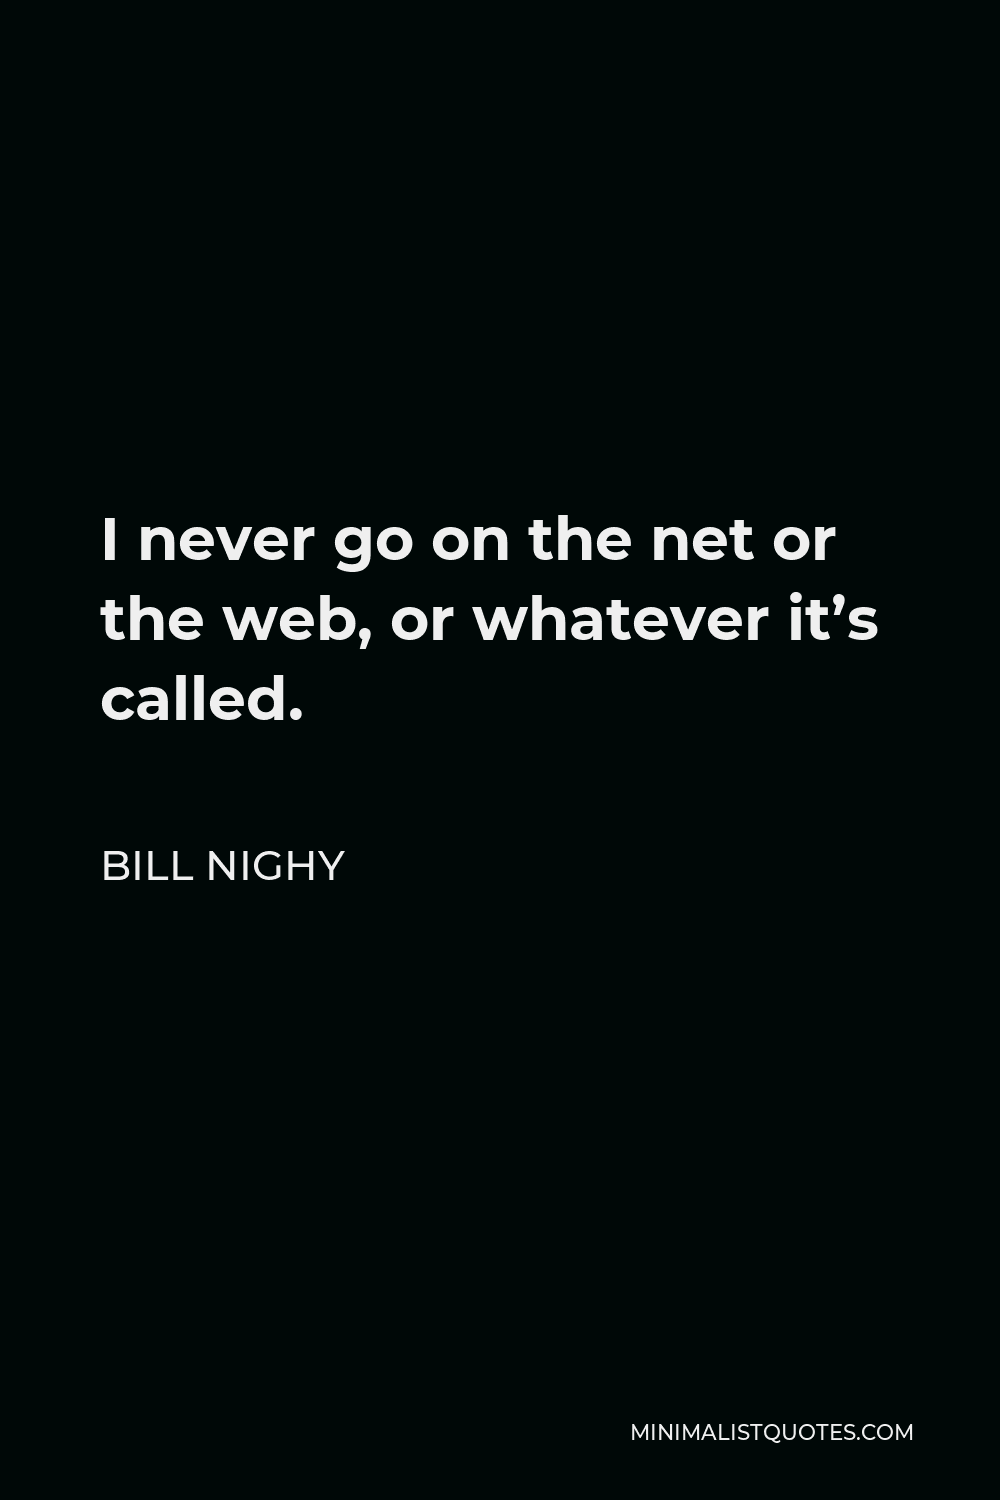 Bill Nighy Quote - I never go on the net or the web, or whatever it’s called.